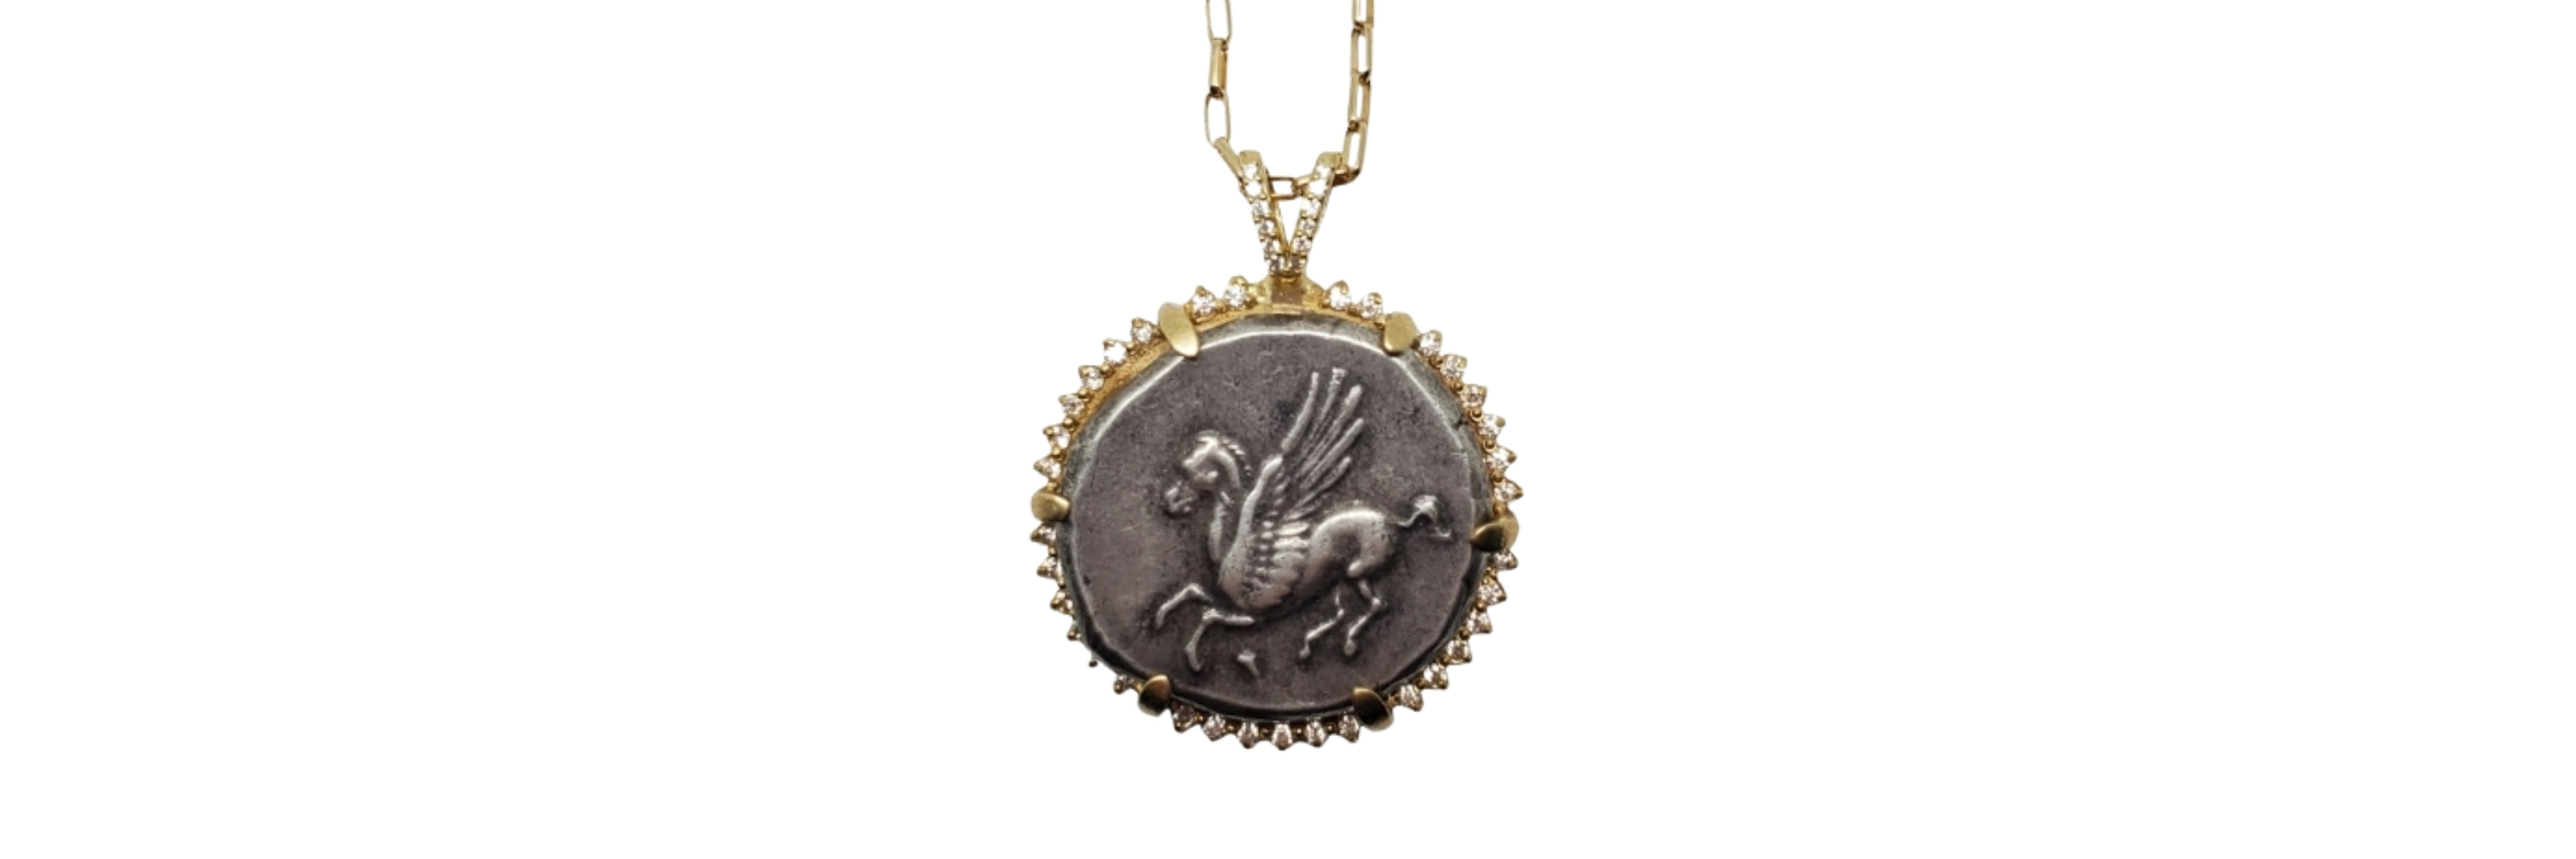 Corinthian Pegasus ancient coin in 18kt gold and diamond pendant setting